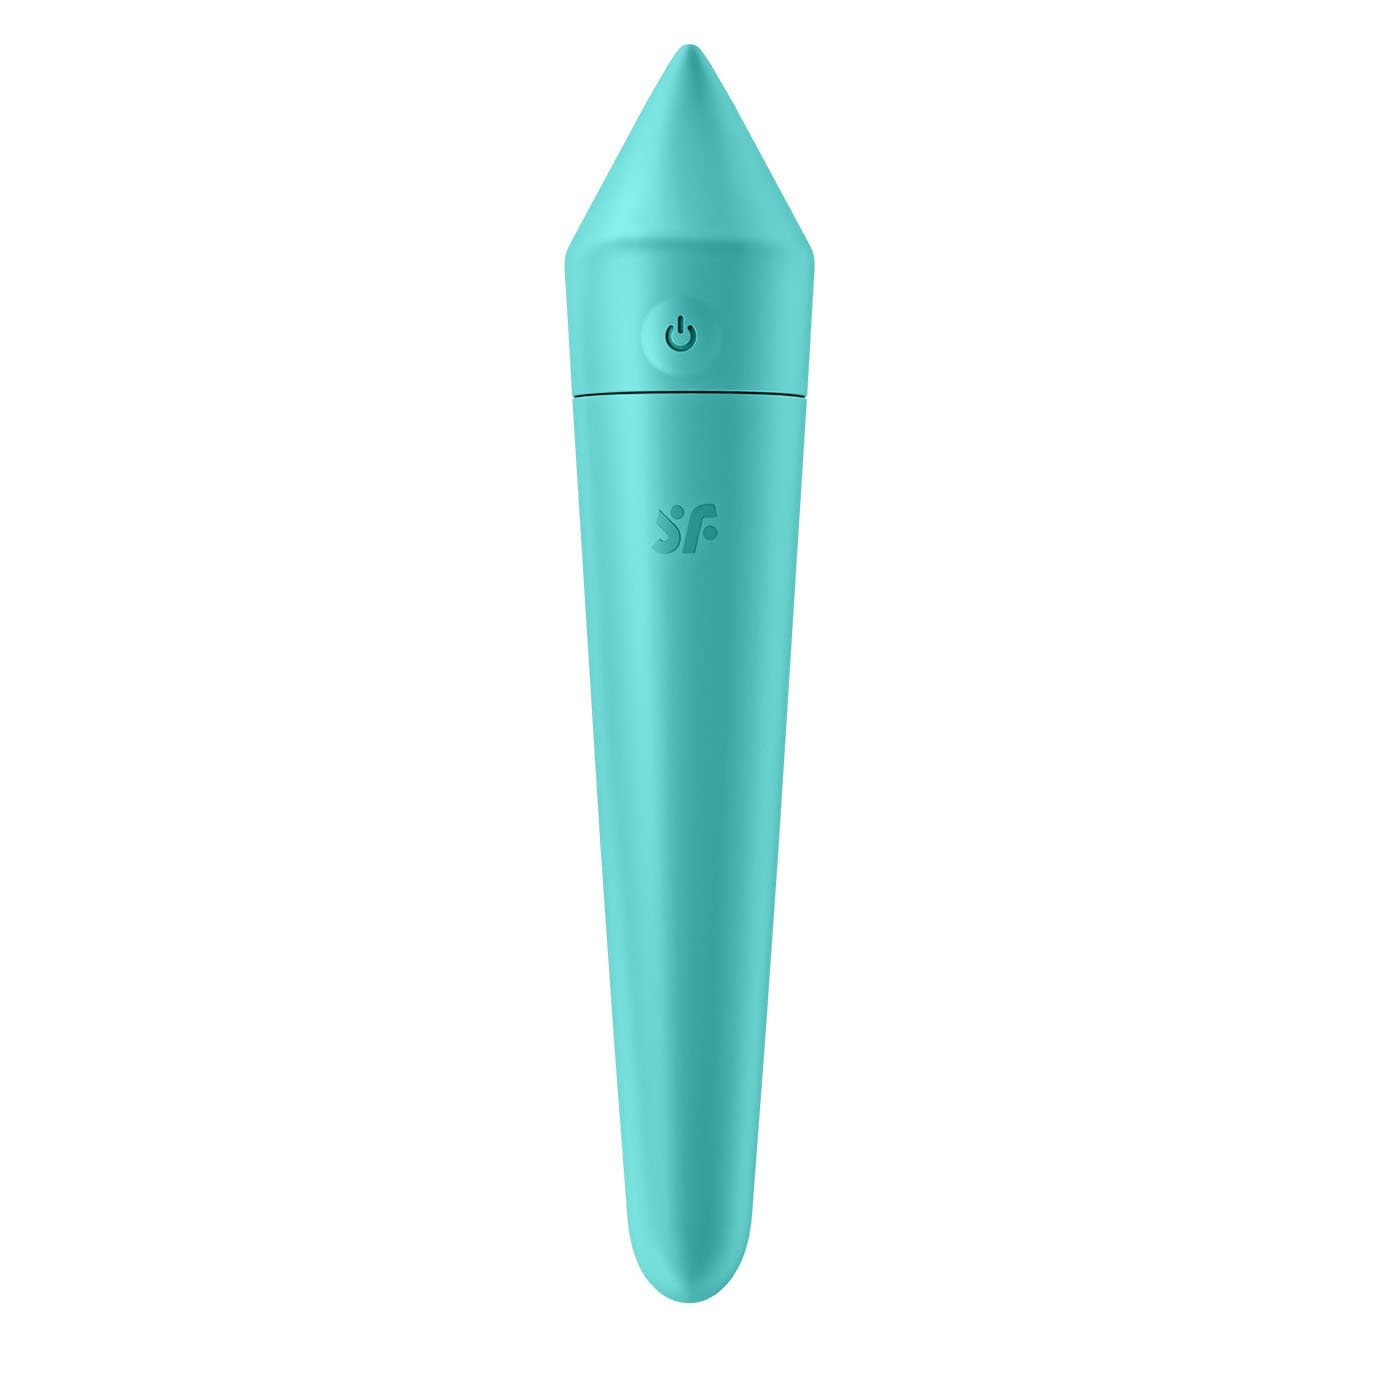 Satisfyer - Ultra Power Bullet 8 Vibrator with Bluetooth and App (Turquoise) Bullet (Vibration) Rechargeable 4061504007748 CherryAffairs